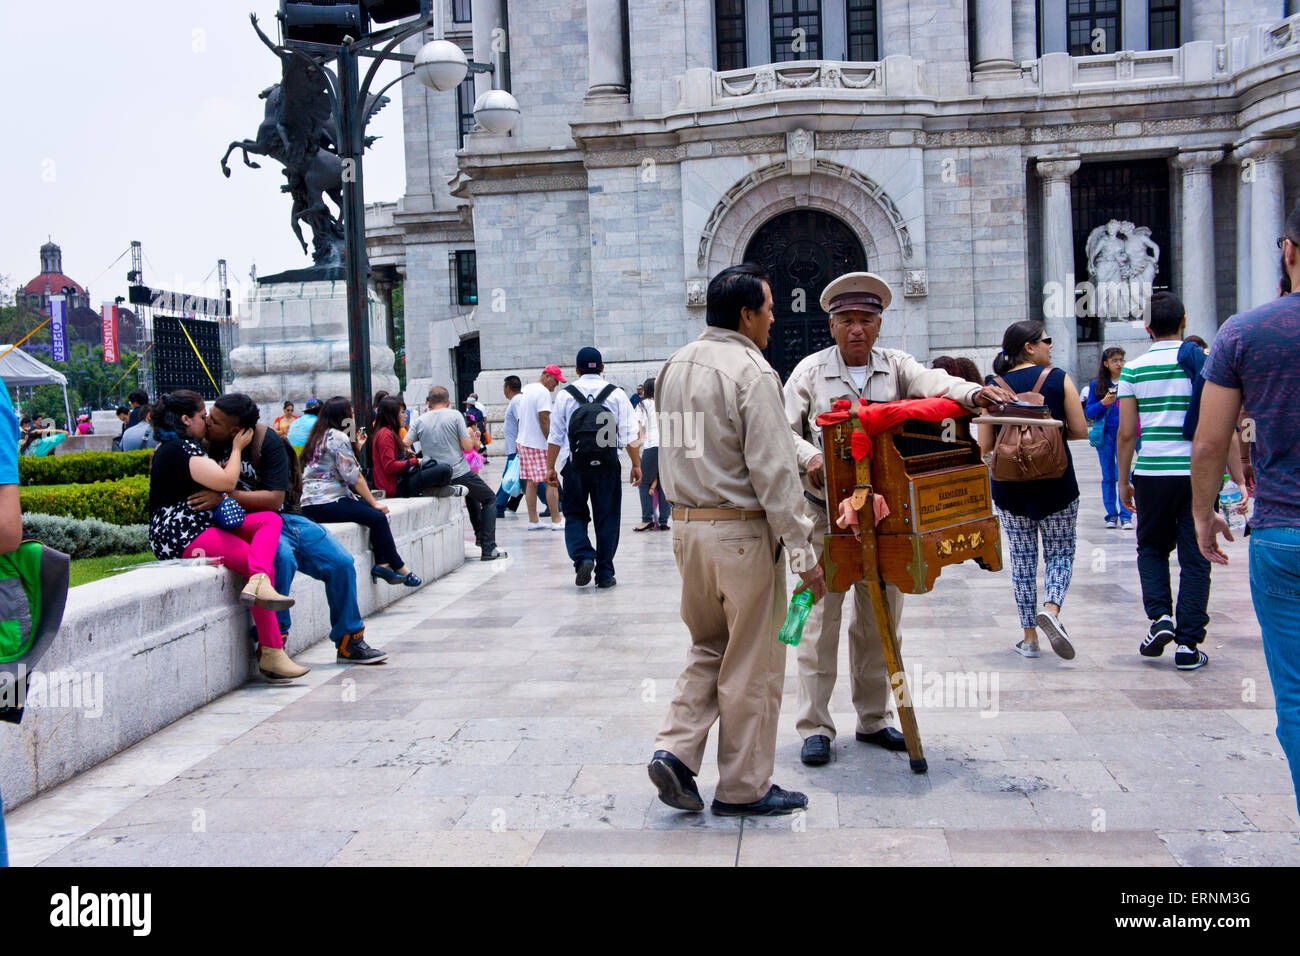 Mexico City, Mexico, May 16, 2015: Organ players entertaining tourists and passer byers in Mexico City, Mexico. Stock Photo